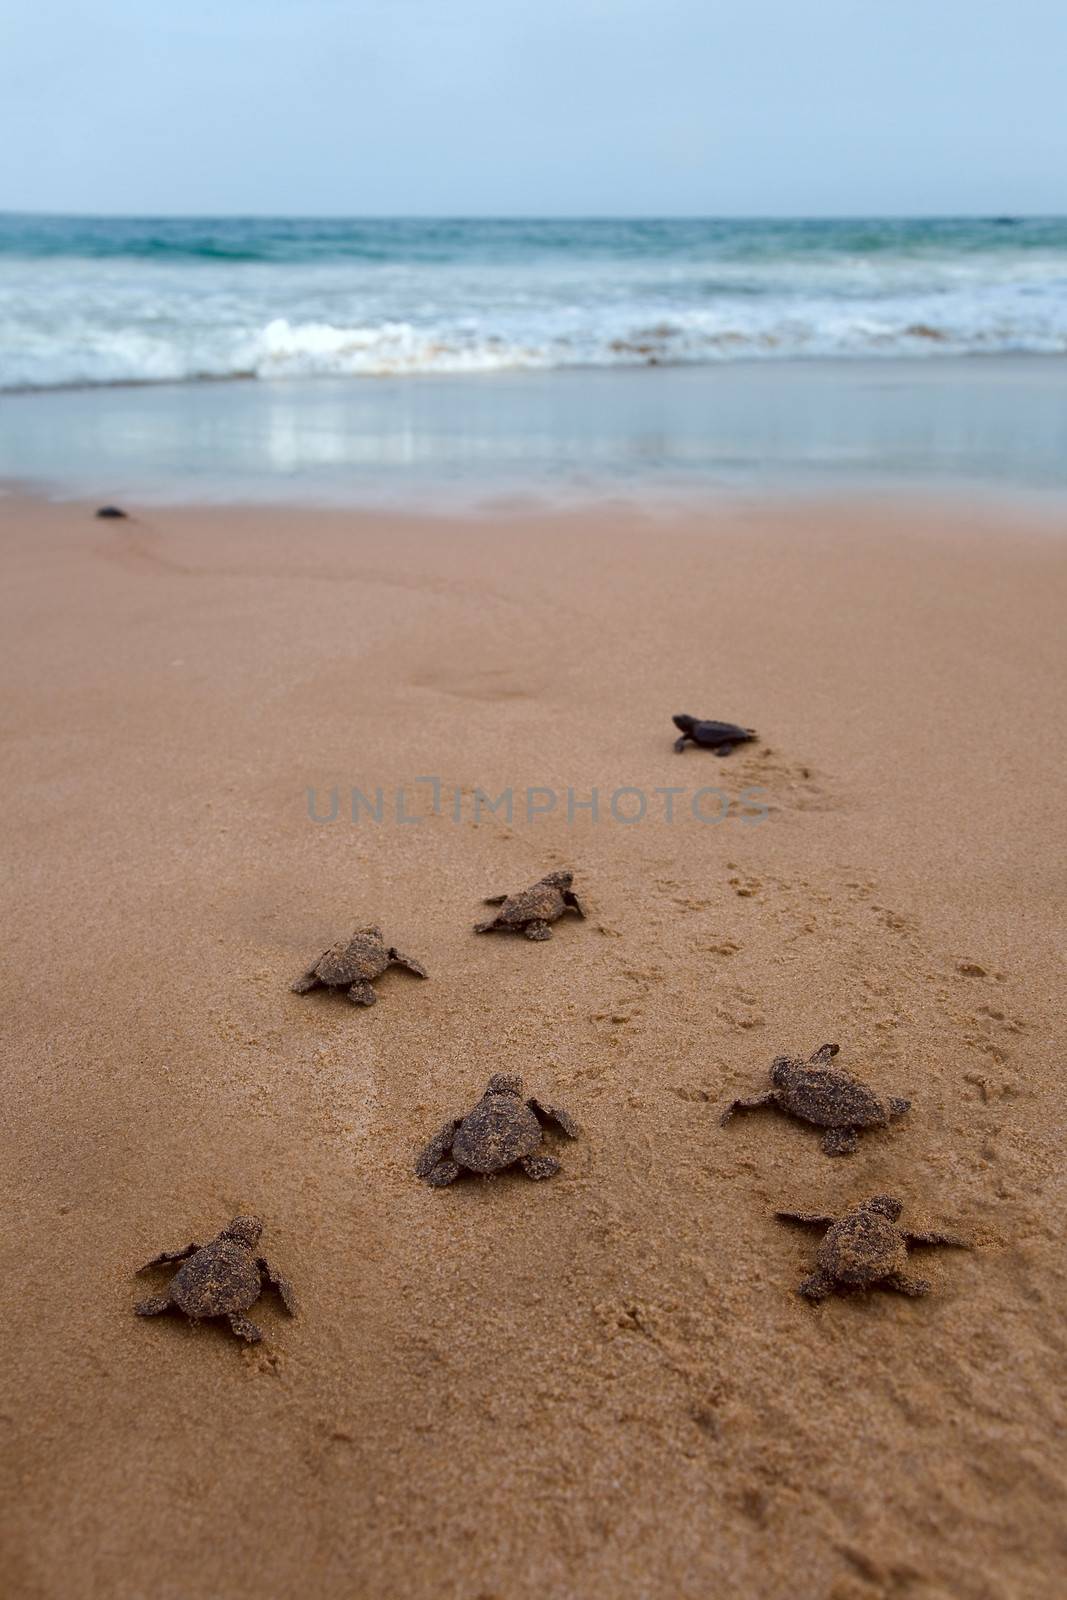 Newly hatched baby Loggerhead  turtle toward the ocean  by foryouinf